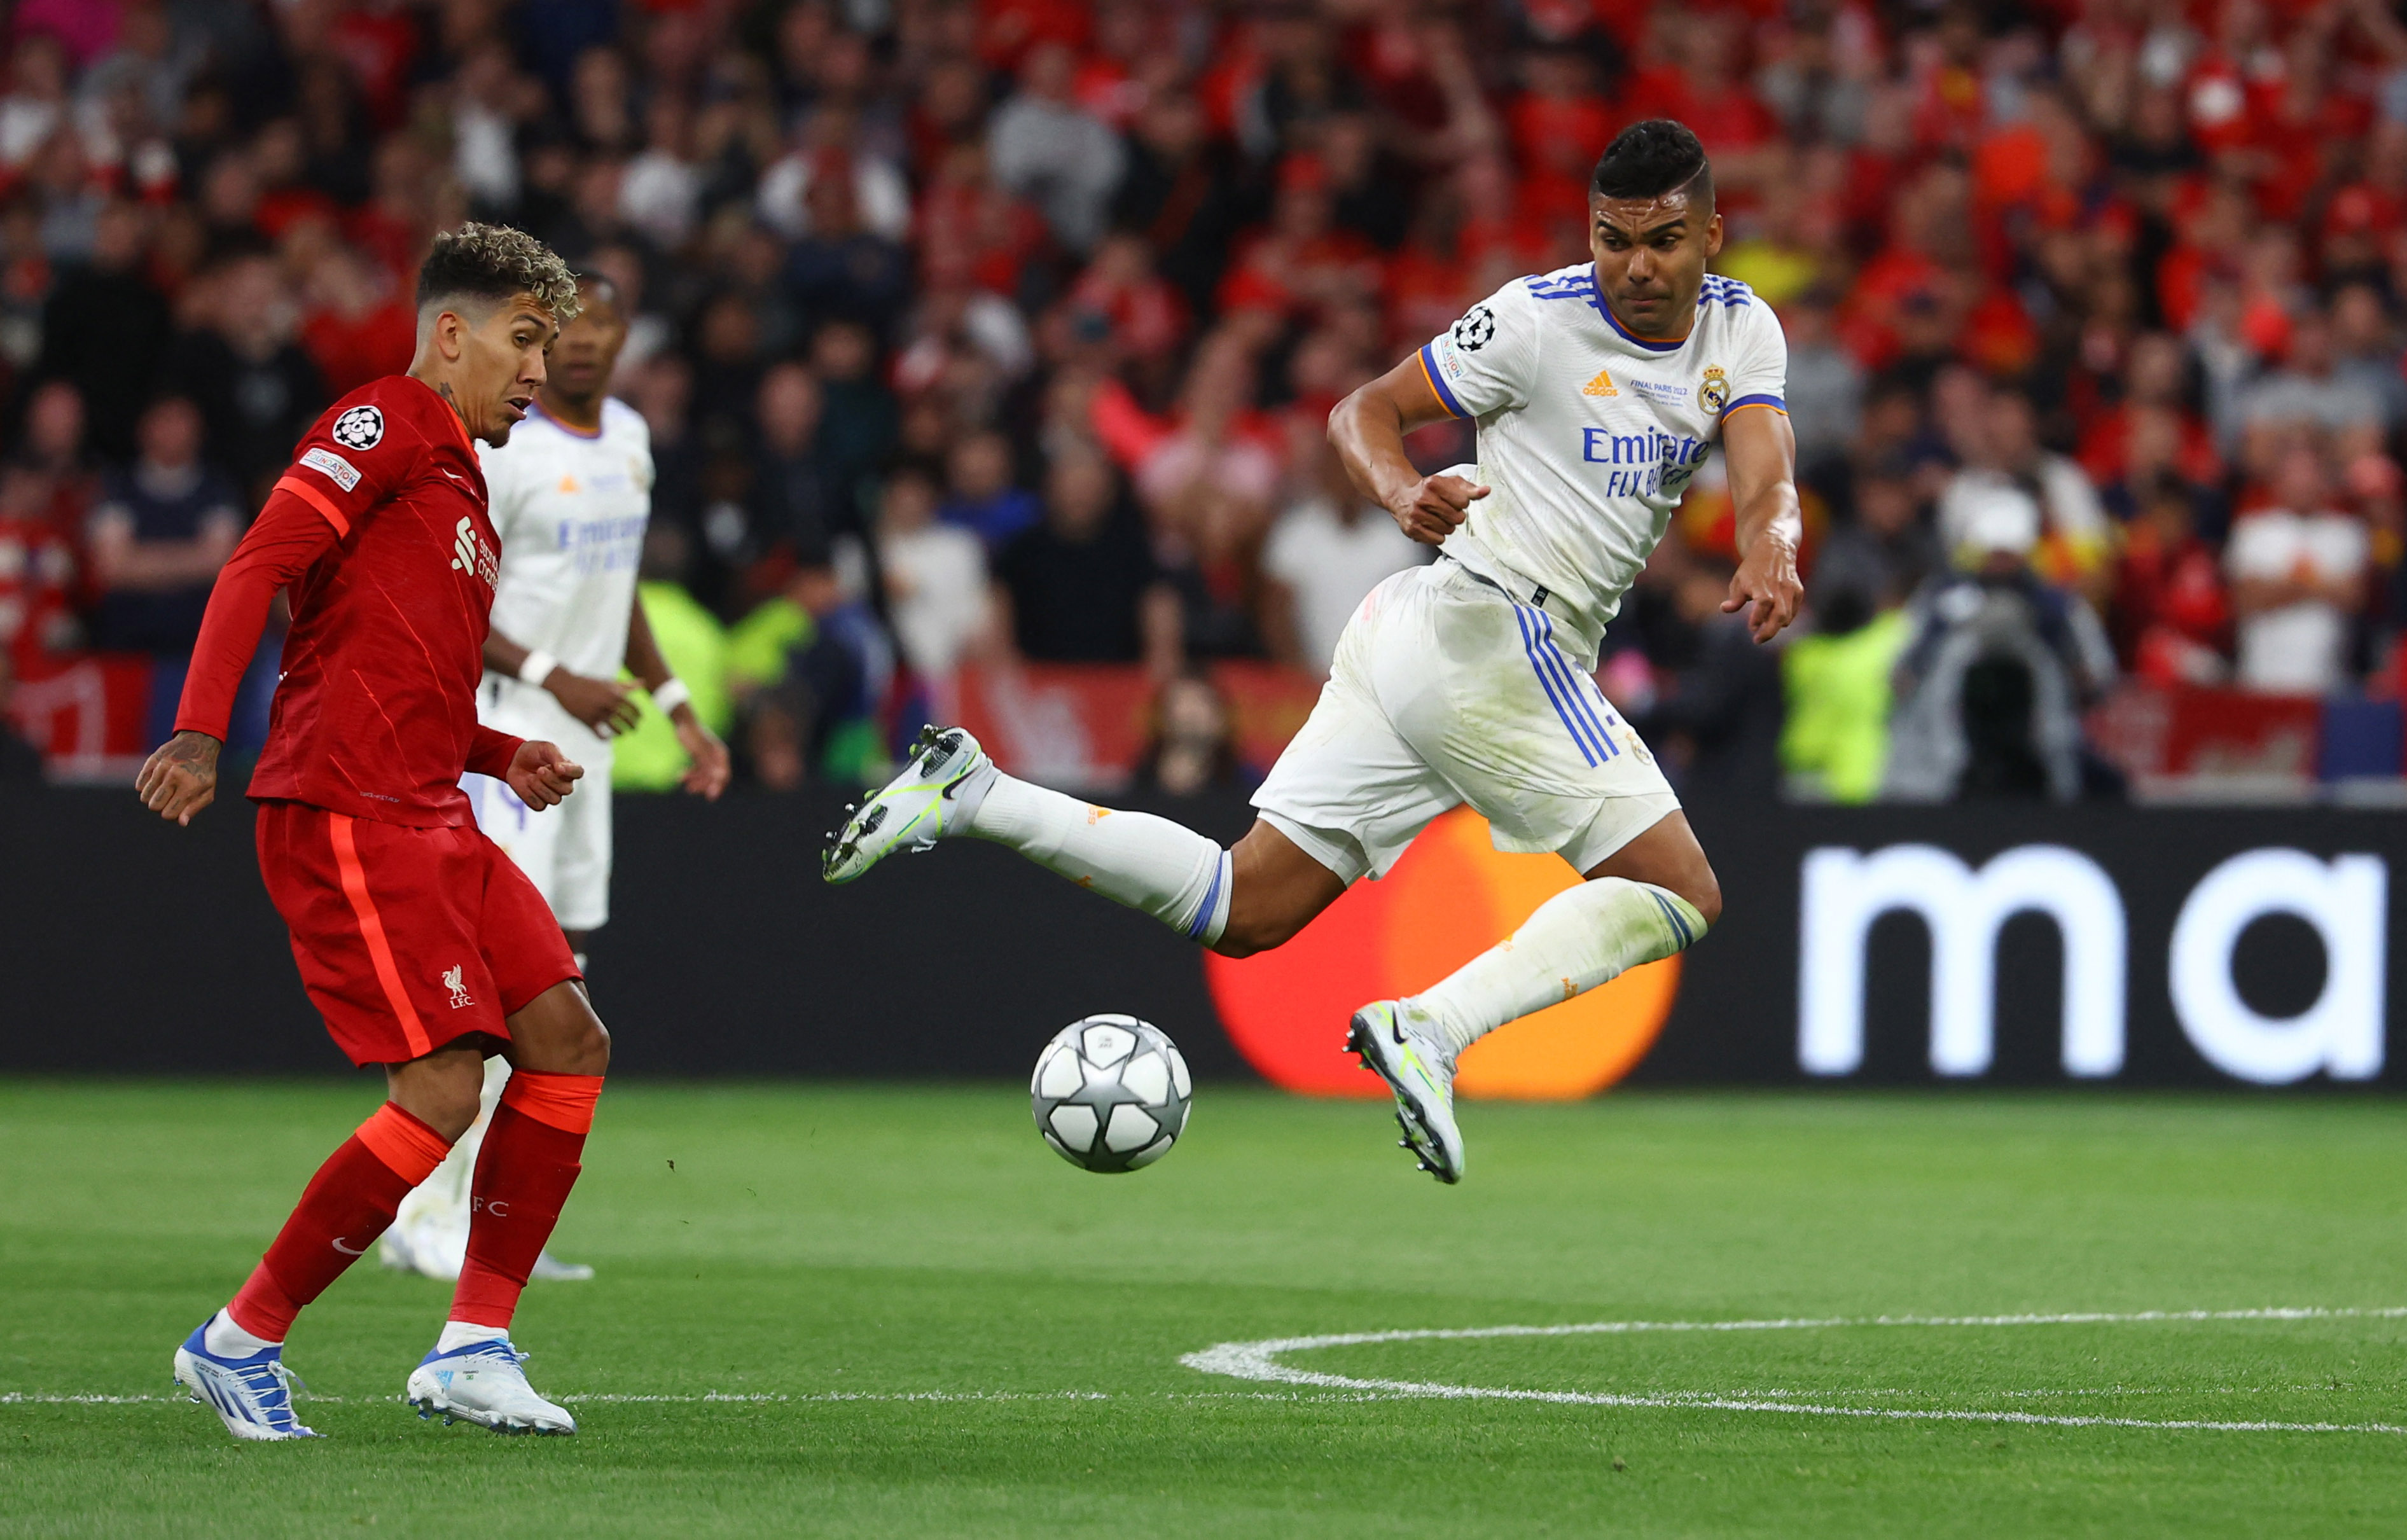 Soccer Football - Champions League Final - Liverpool v Real Madrid - Stade de France, Saint-Denis near Paris, France - May 28, 2022 Real Madrid's Casemiro in action with Liverpool's Roberto Firmino REUTERS/Kai Pfaffenbach